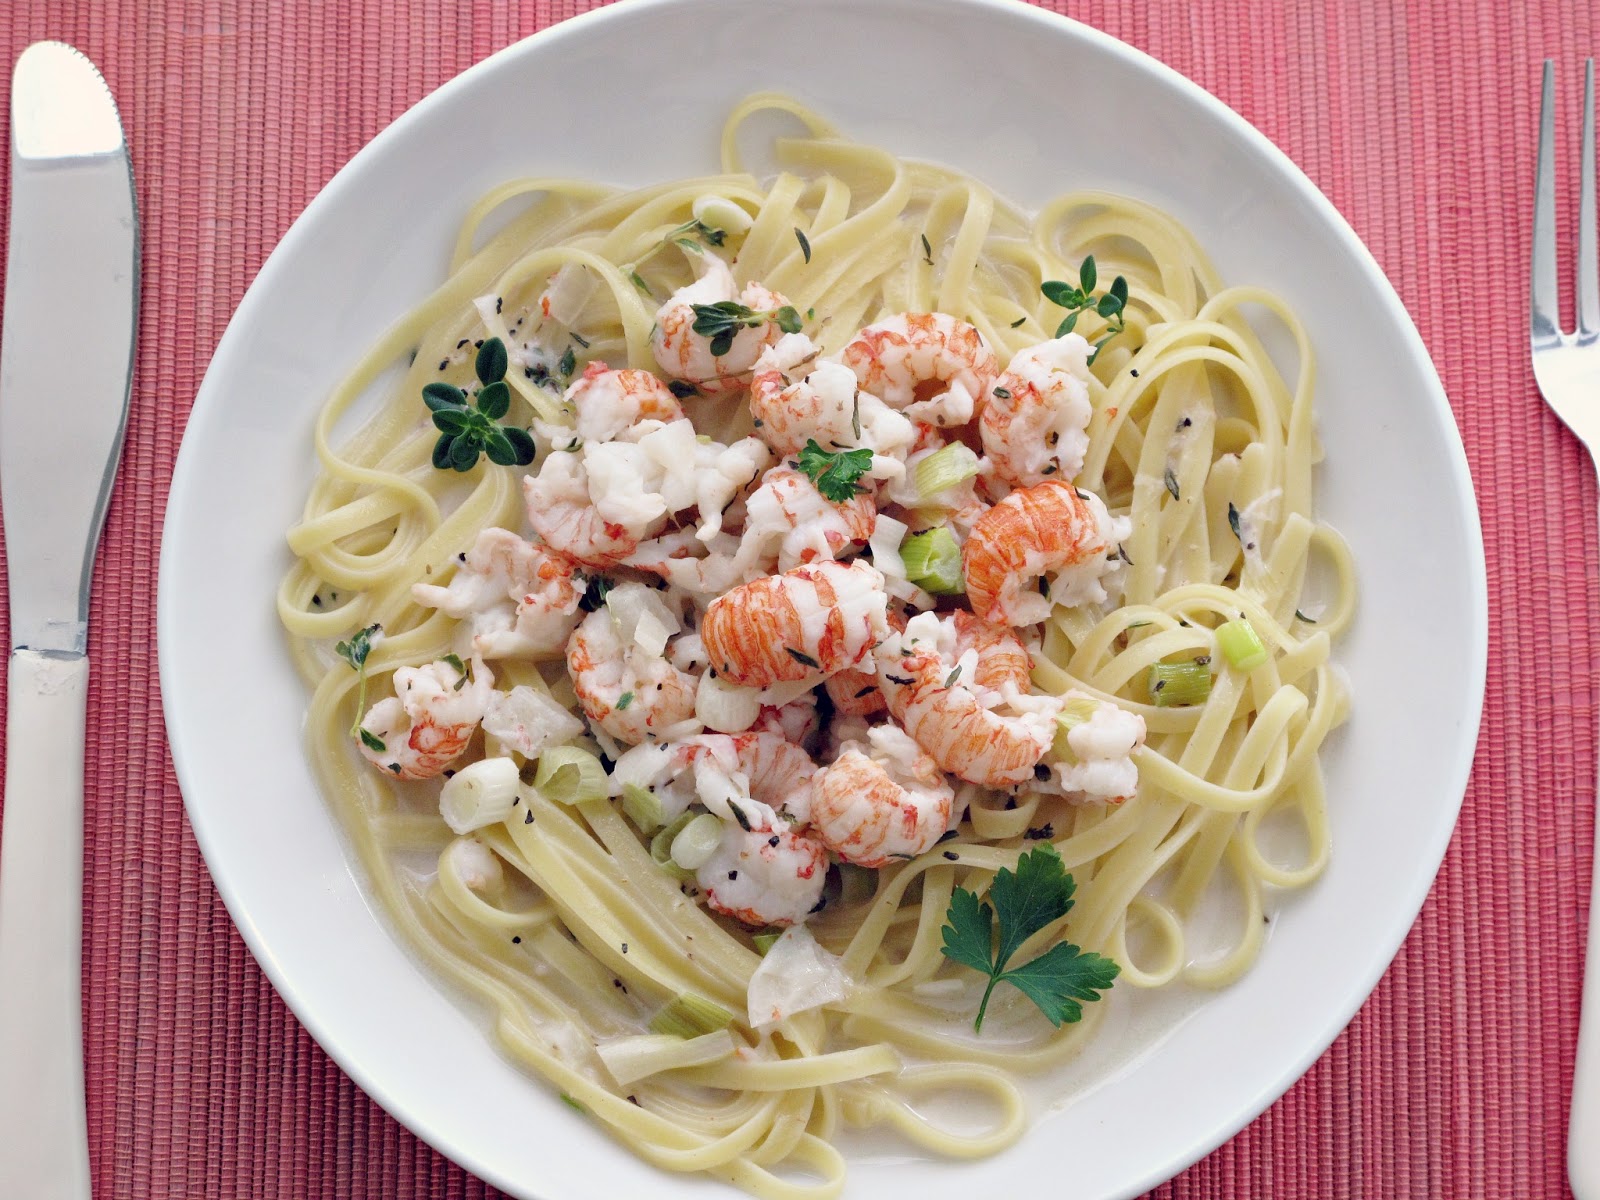 Simply Healthy Family: Lobster Fettuccine in a light Béchamel Sauce